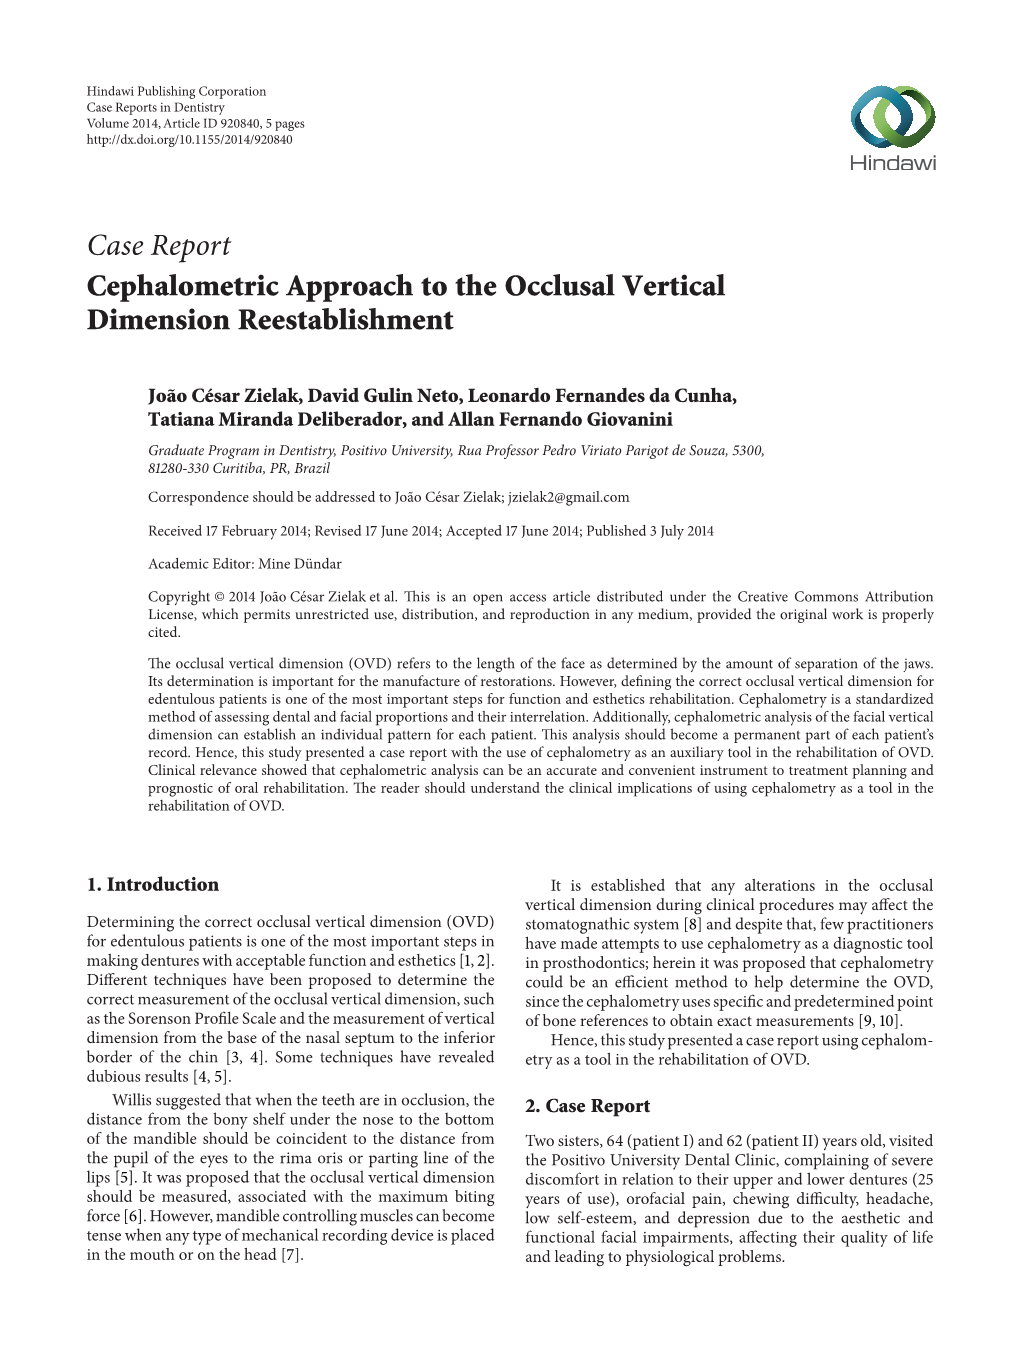 Cephalometric Approach to the Occlusal Vertical Dimension Reestablishment